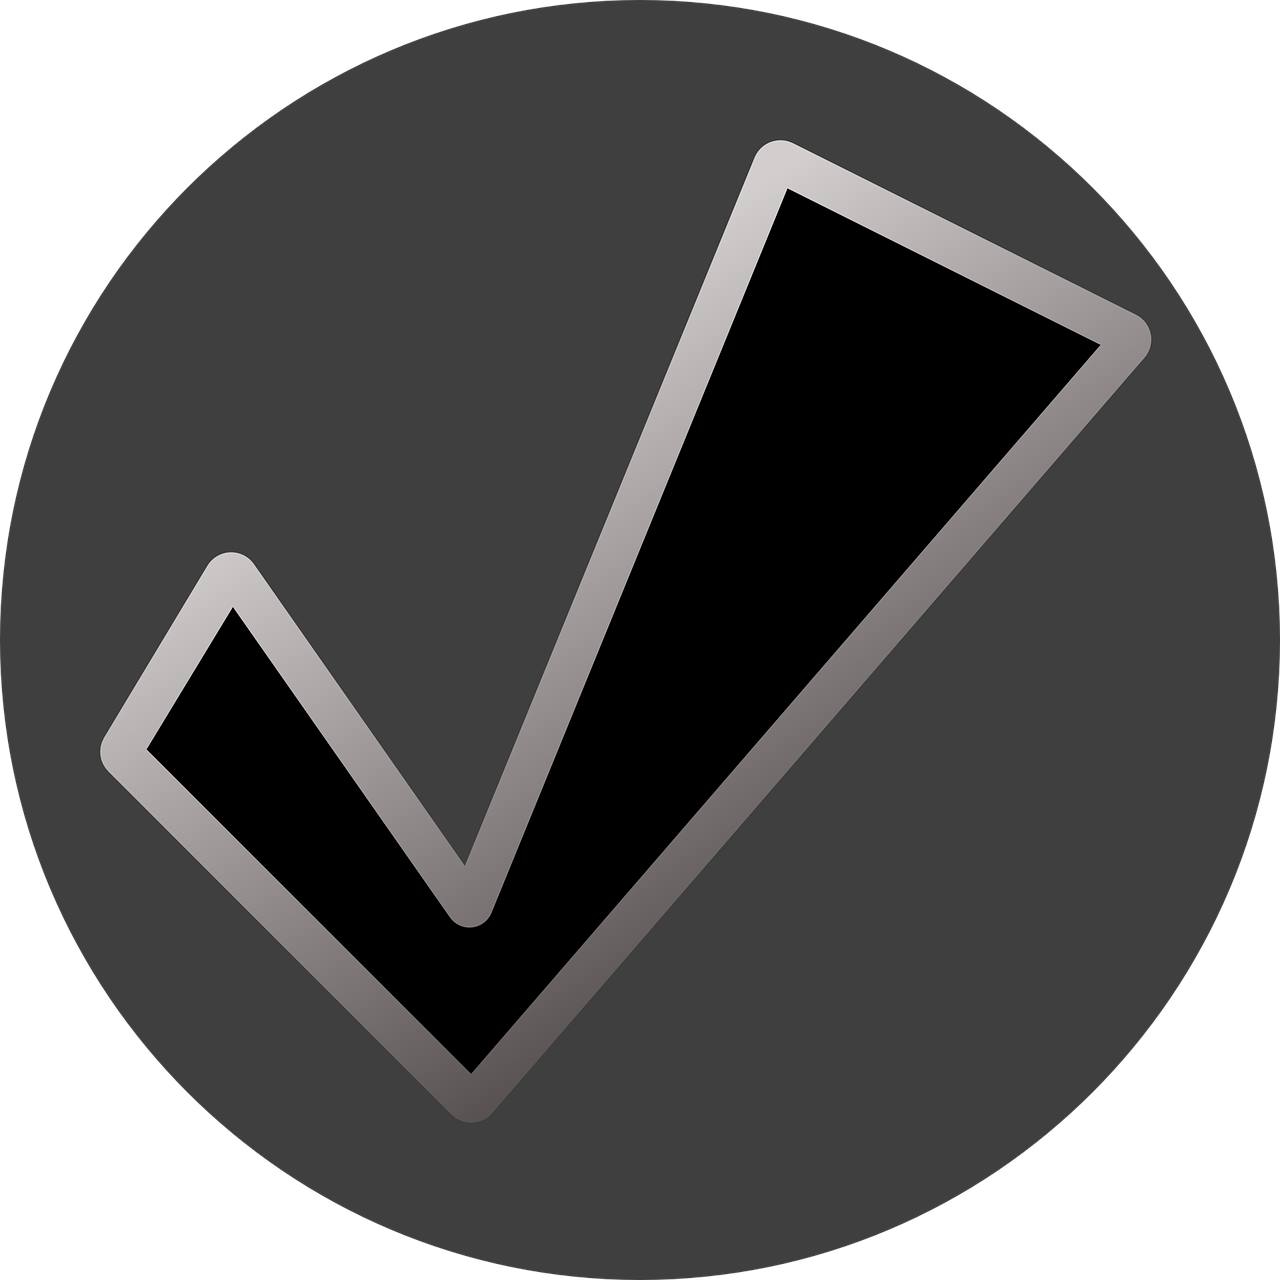 Checkmark Icon Graphic PNG